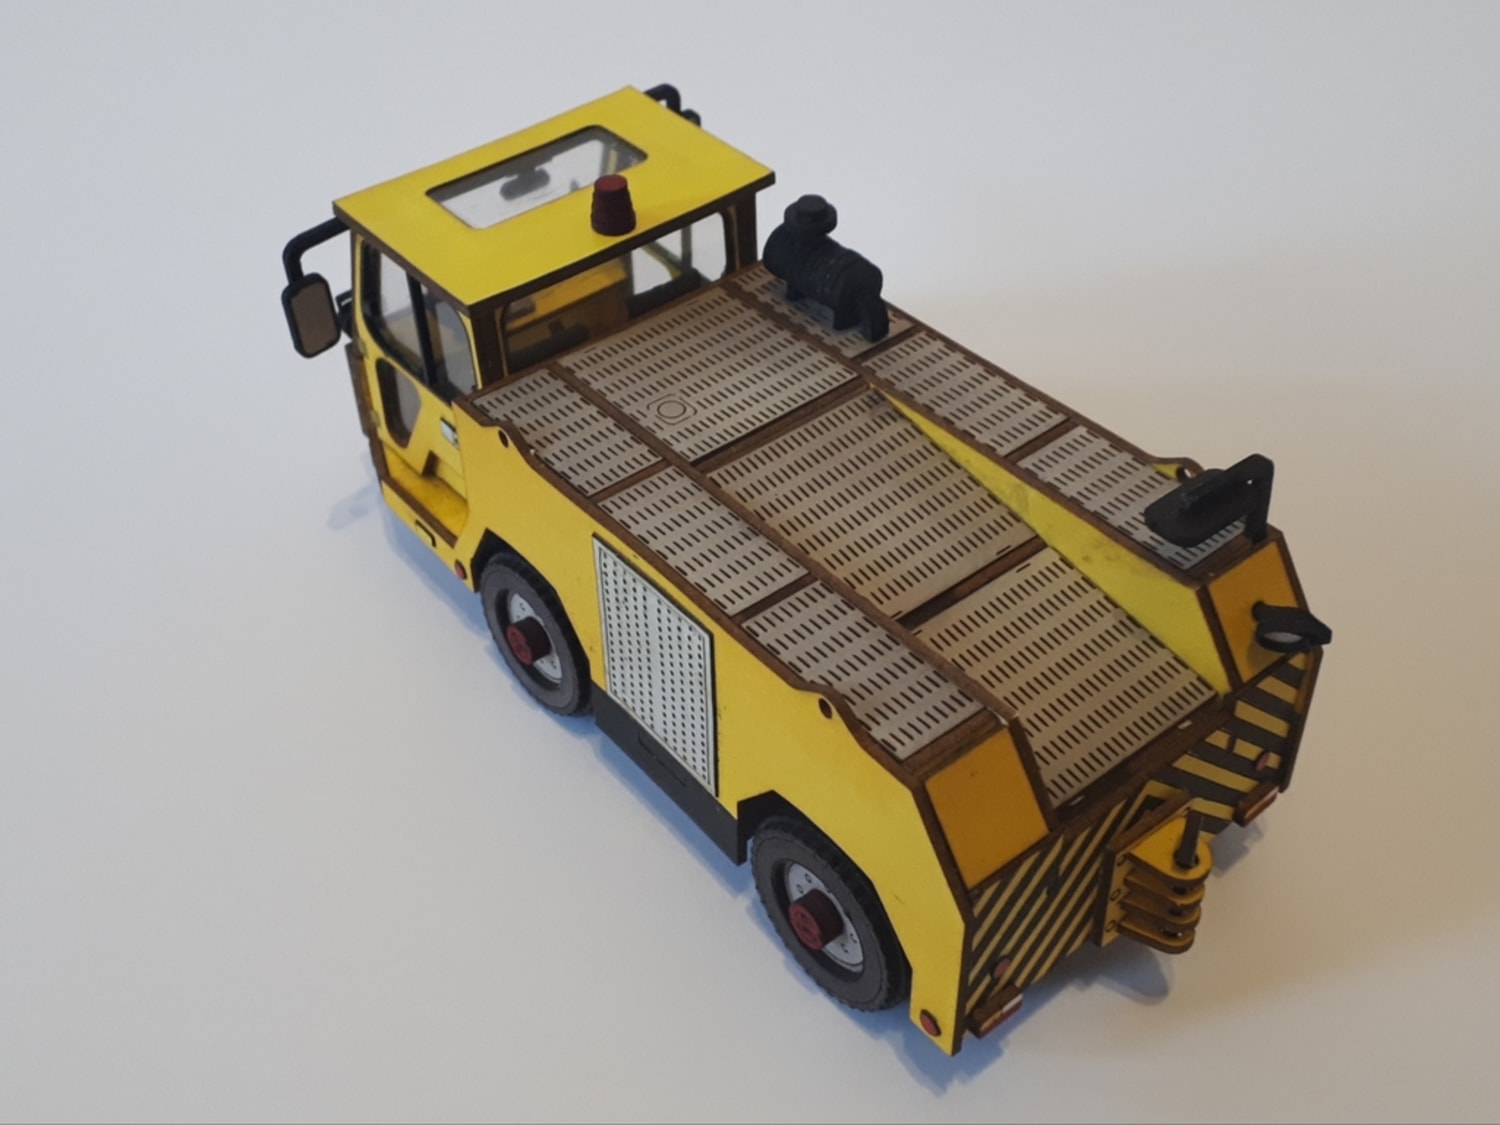 Laser Cut Airfield Towing Tractor TMX-60 3D Puzzle DXF File